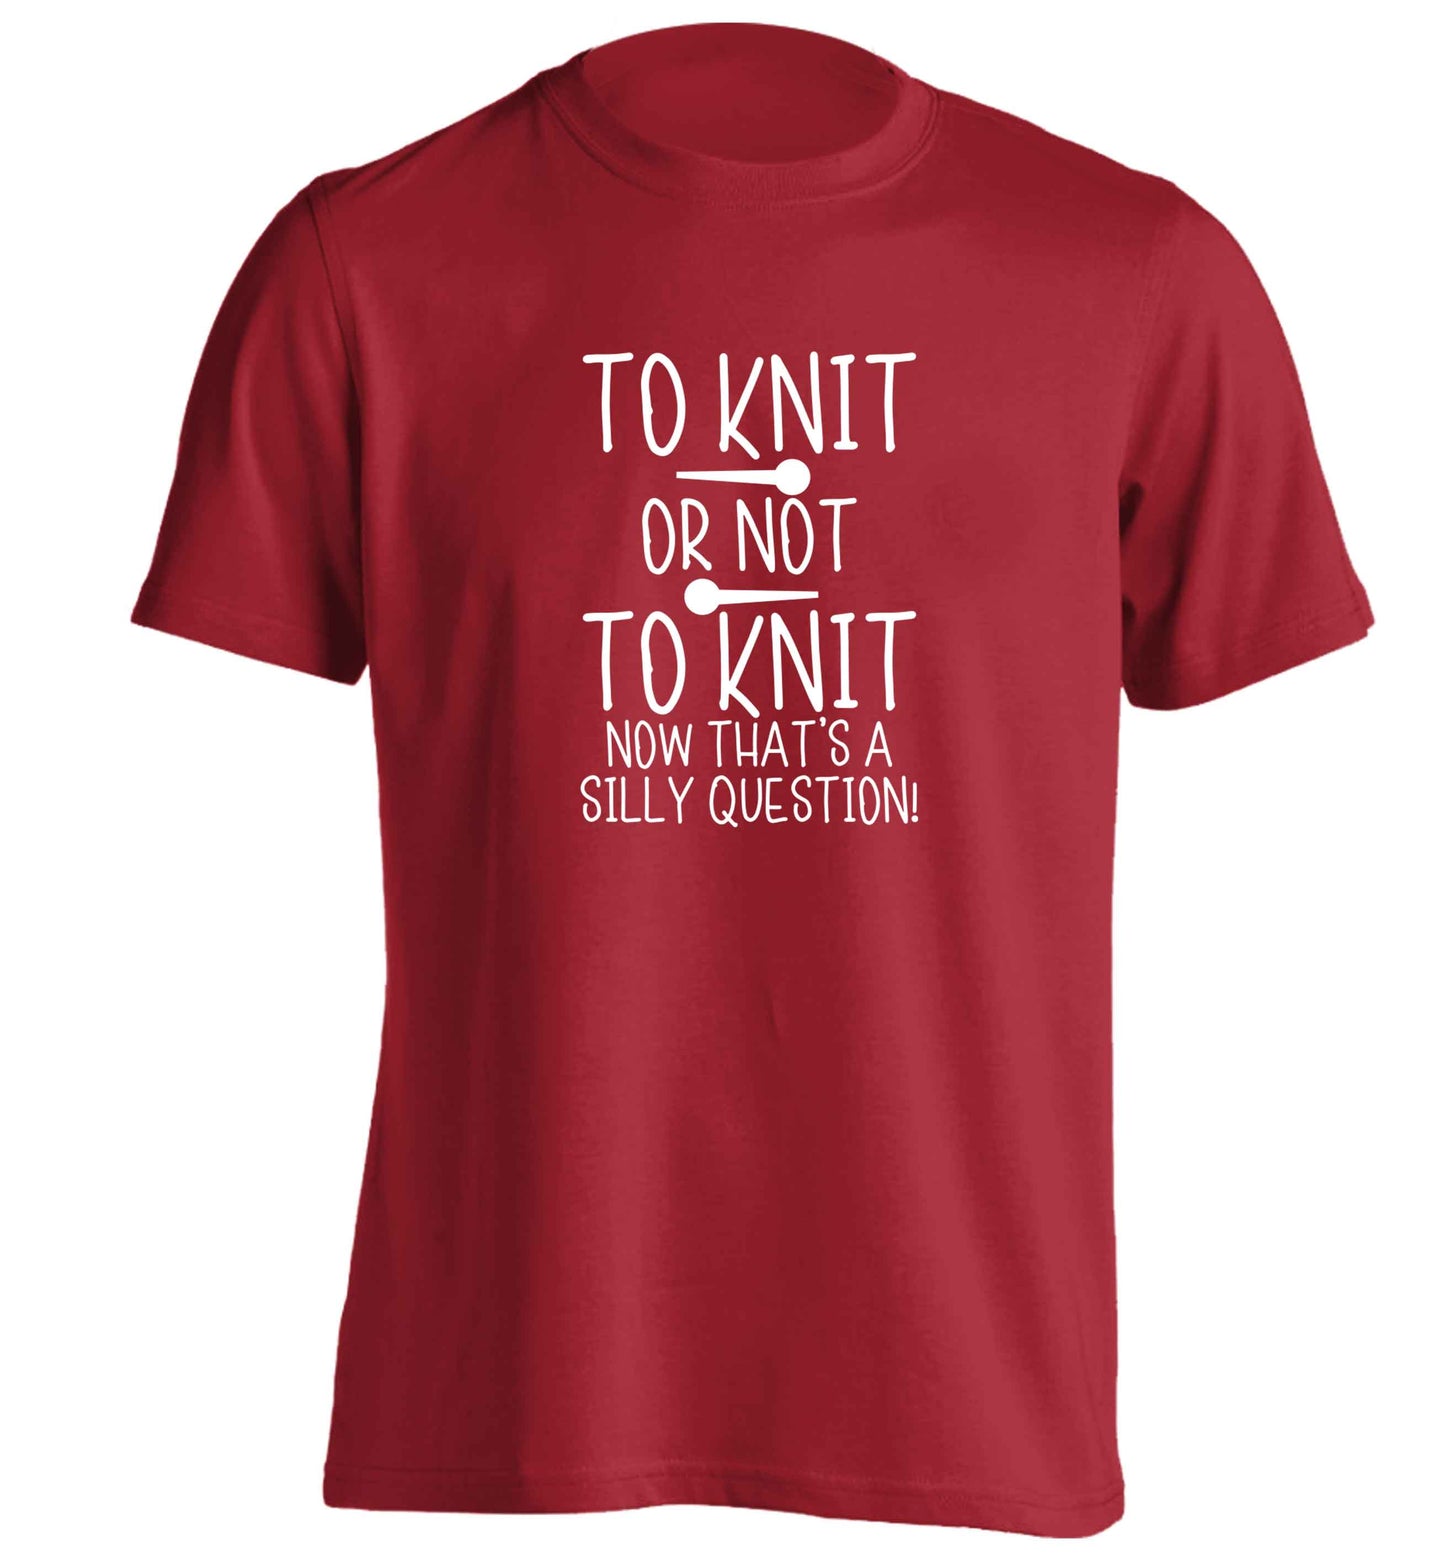 To knit or not to knit now that's a silly question adults unisex red Tshirt 2XL